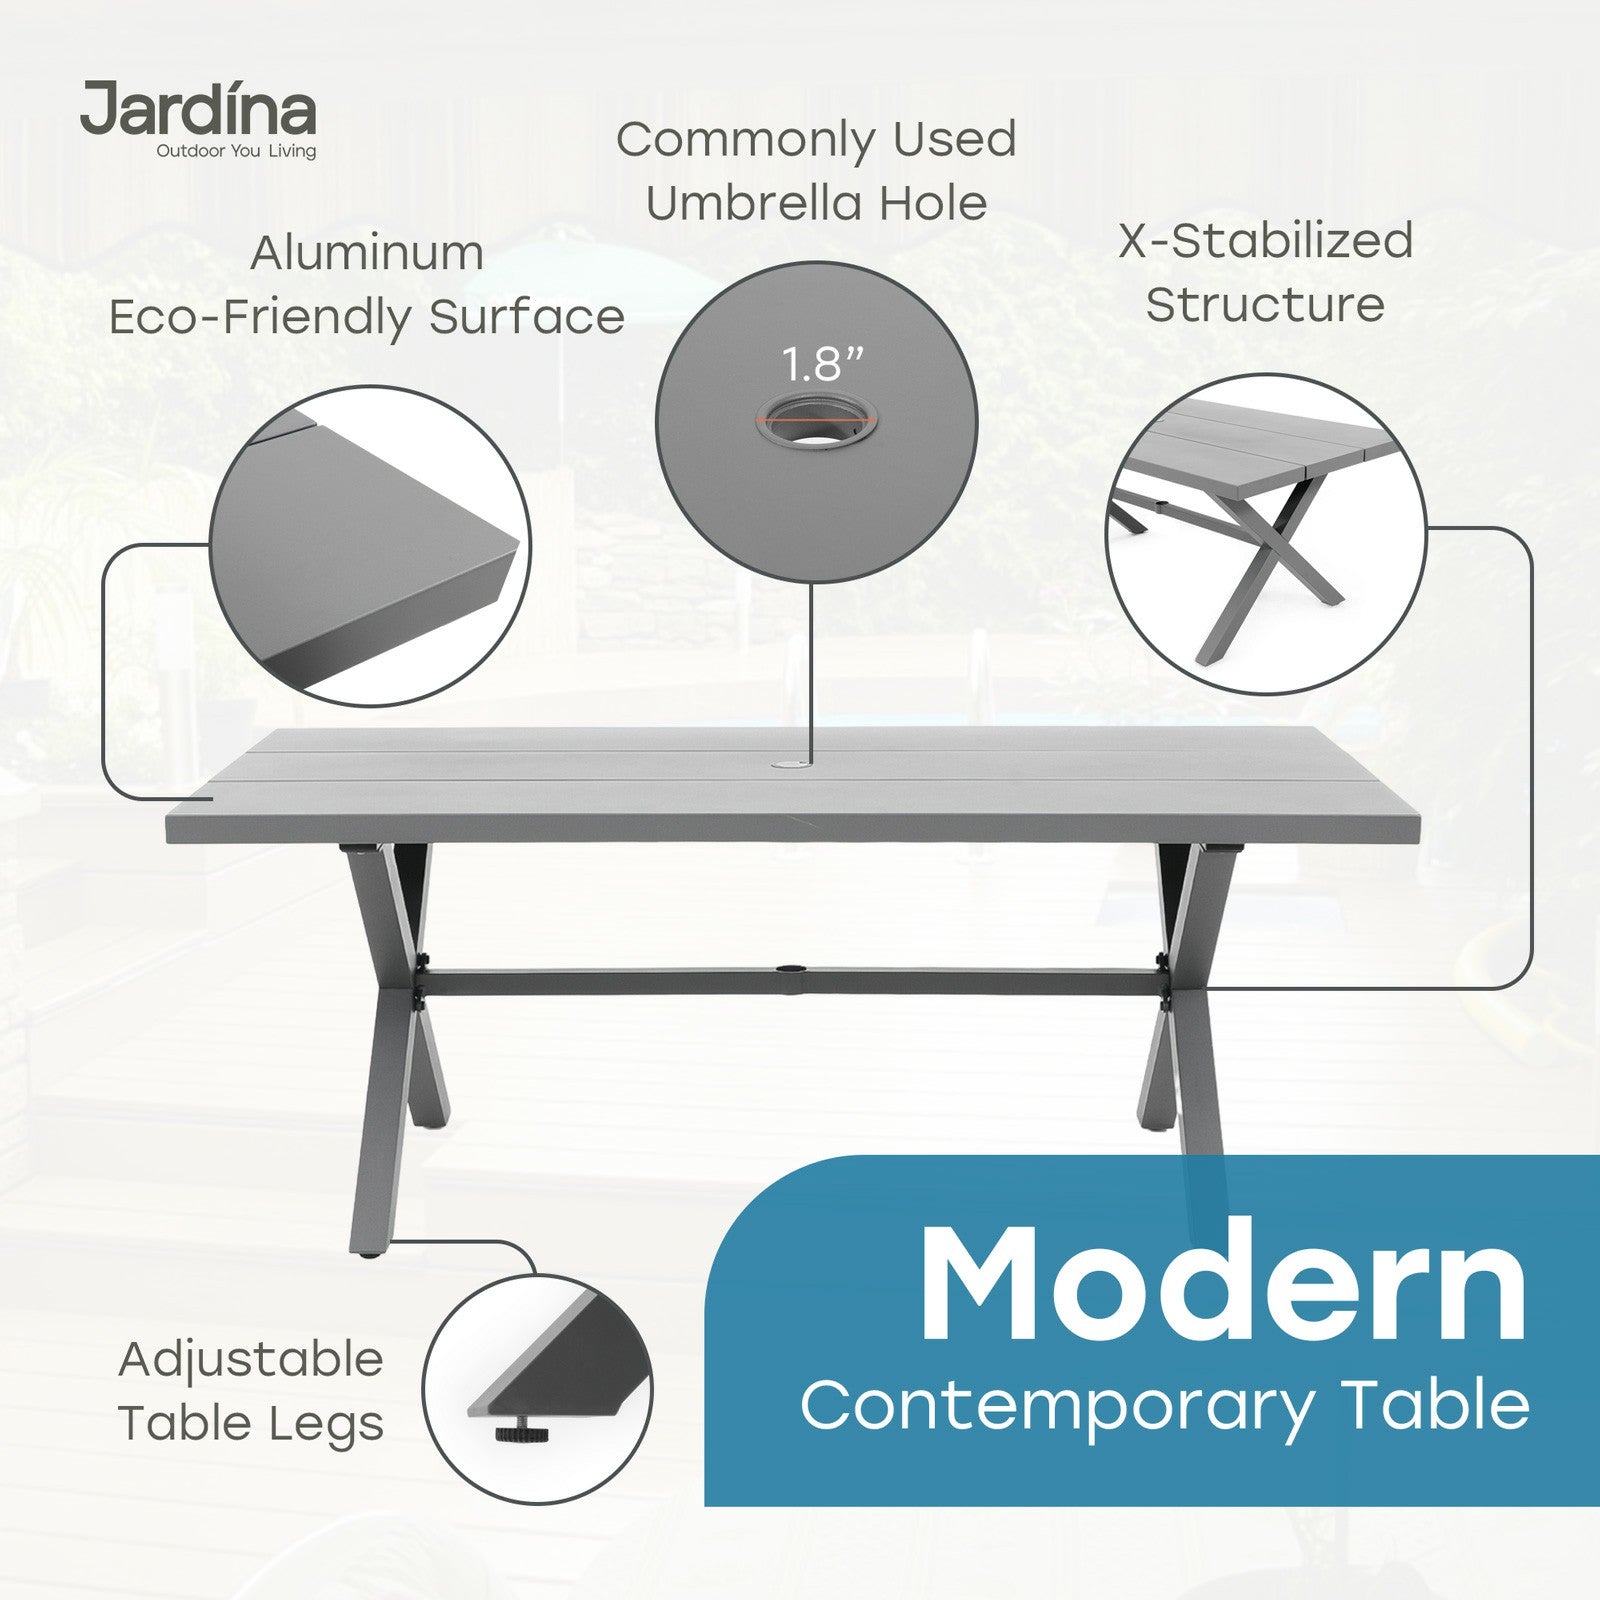 gray aluminum modern outdoor dining table with umbrella hole and x-stabilized structure details